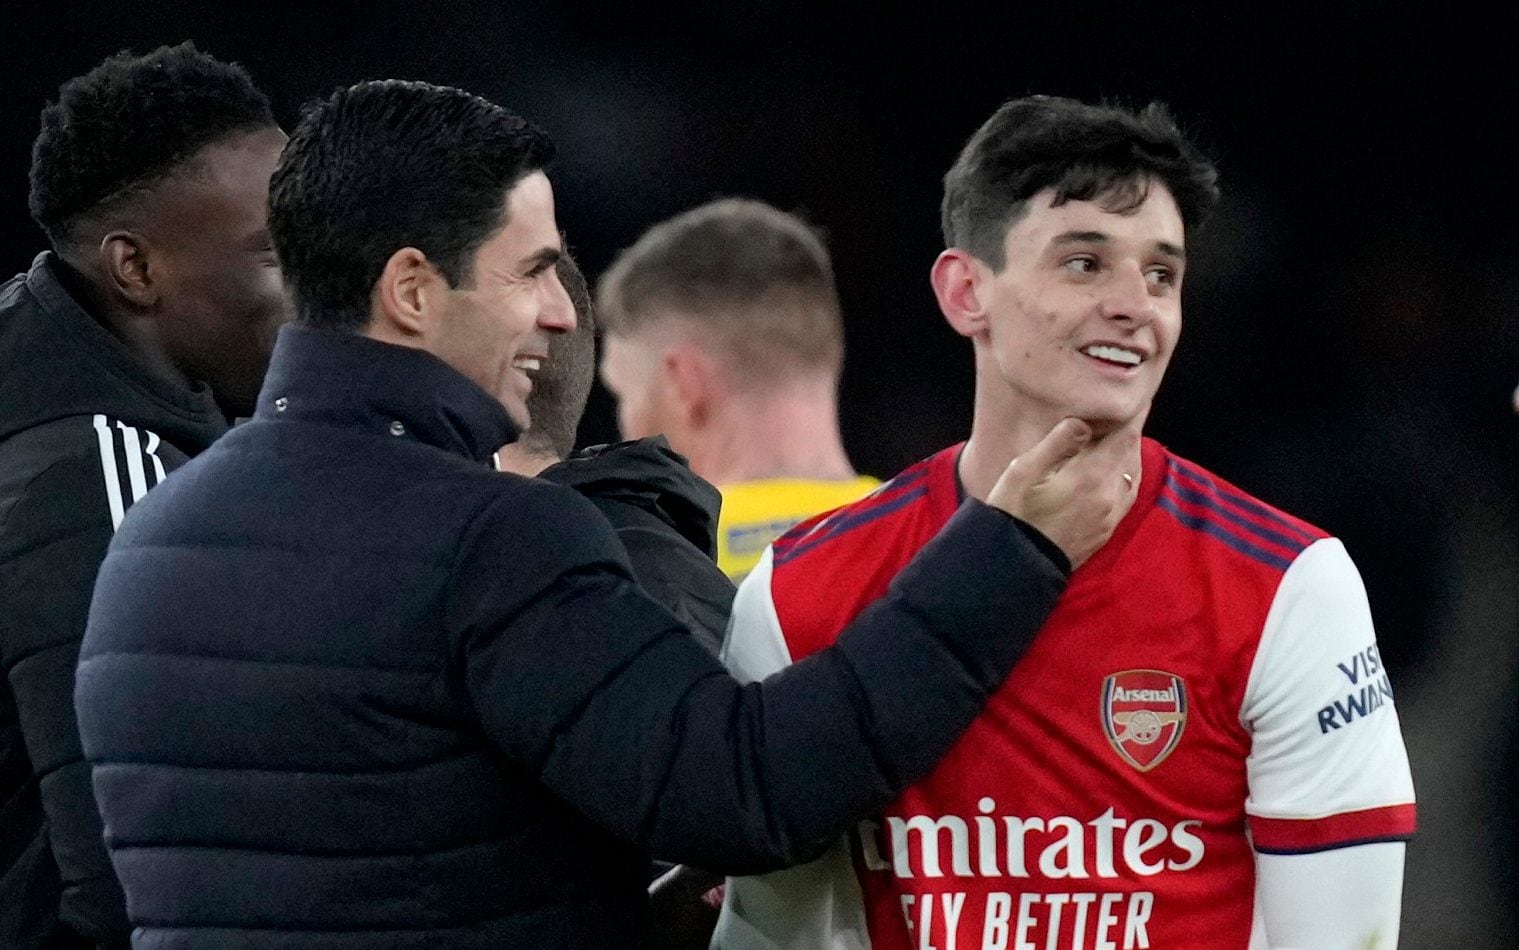 Watch: Arsenal loanee Charlie Patino’s MOTM performance on full debut